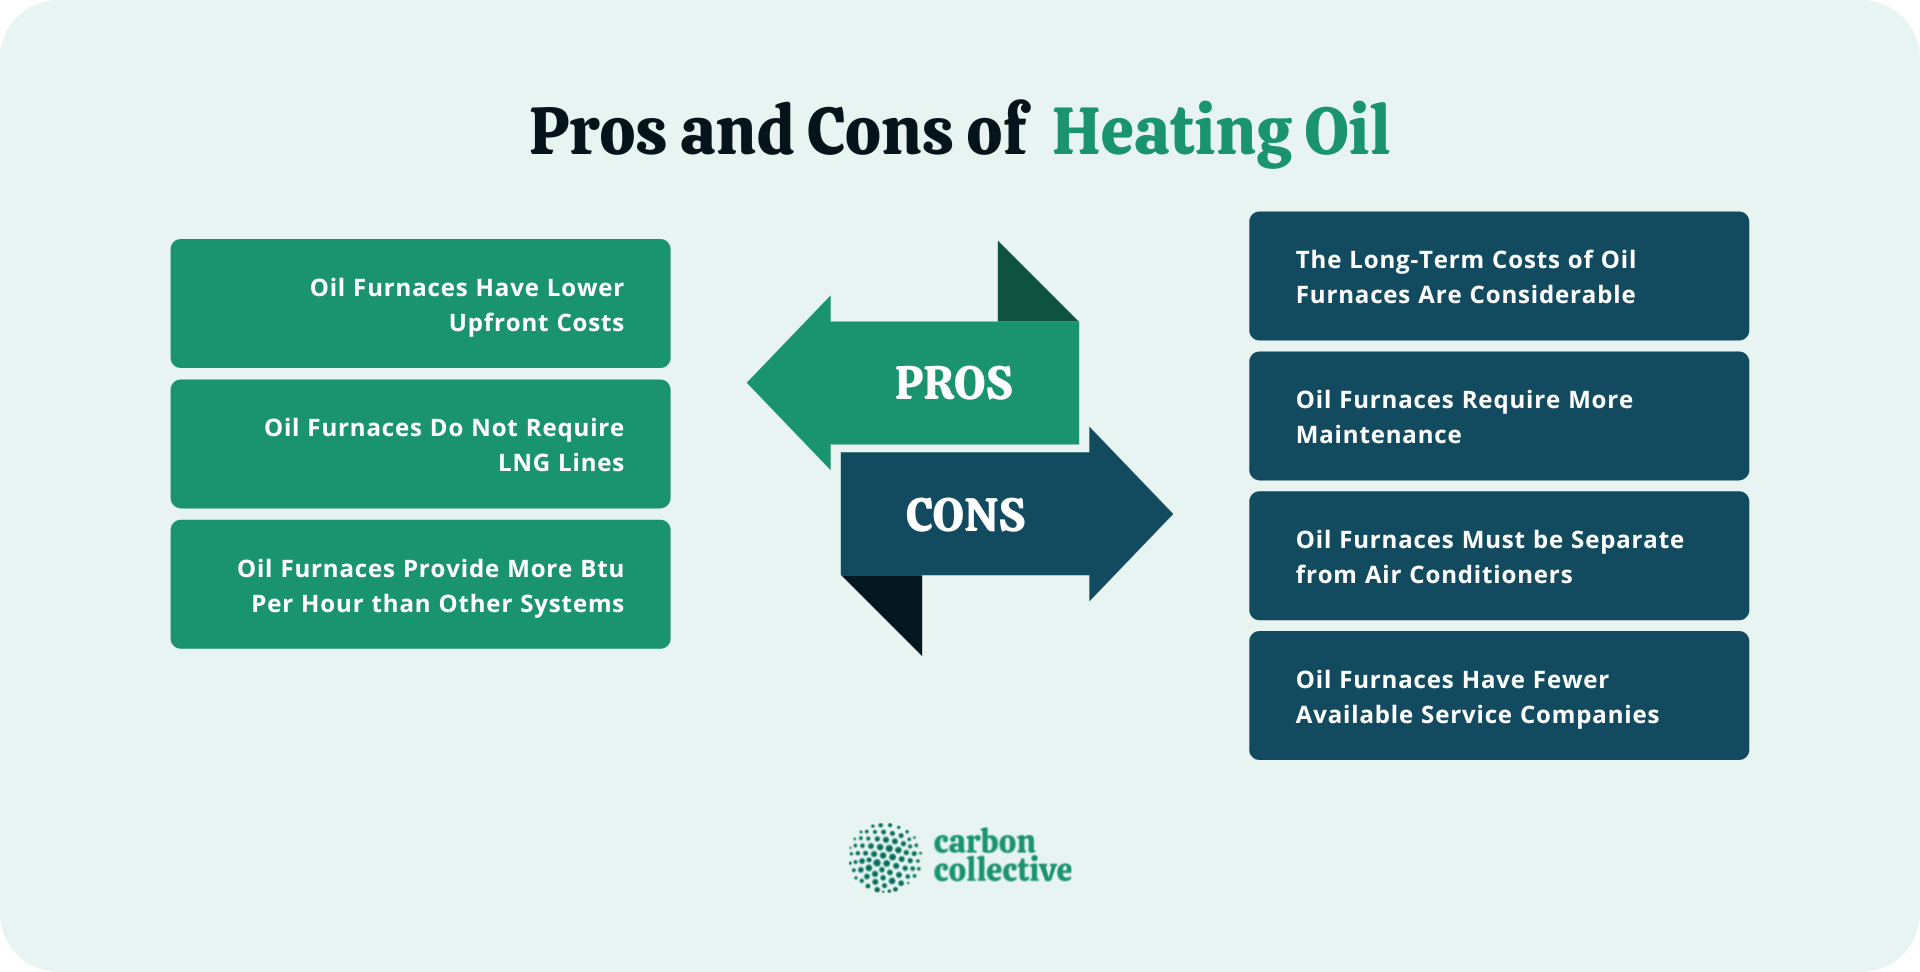 Pros and Cons of Different Furnaces